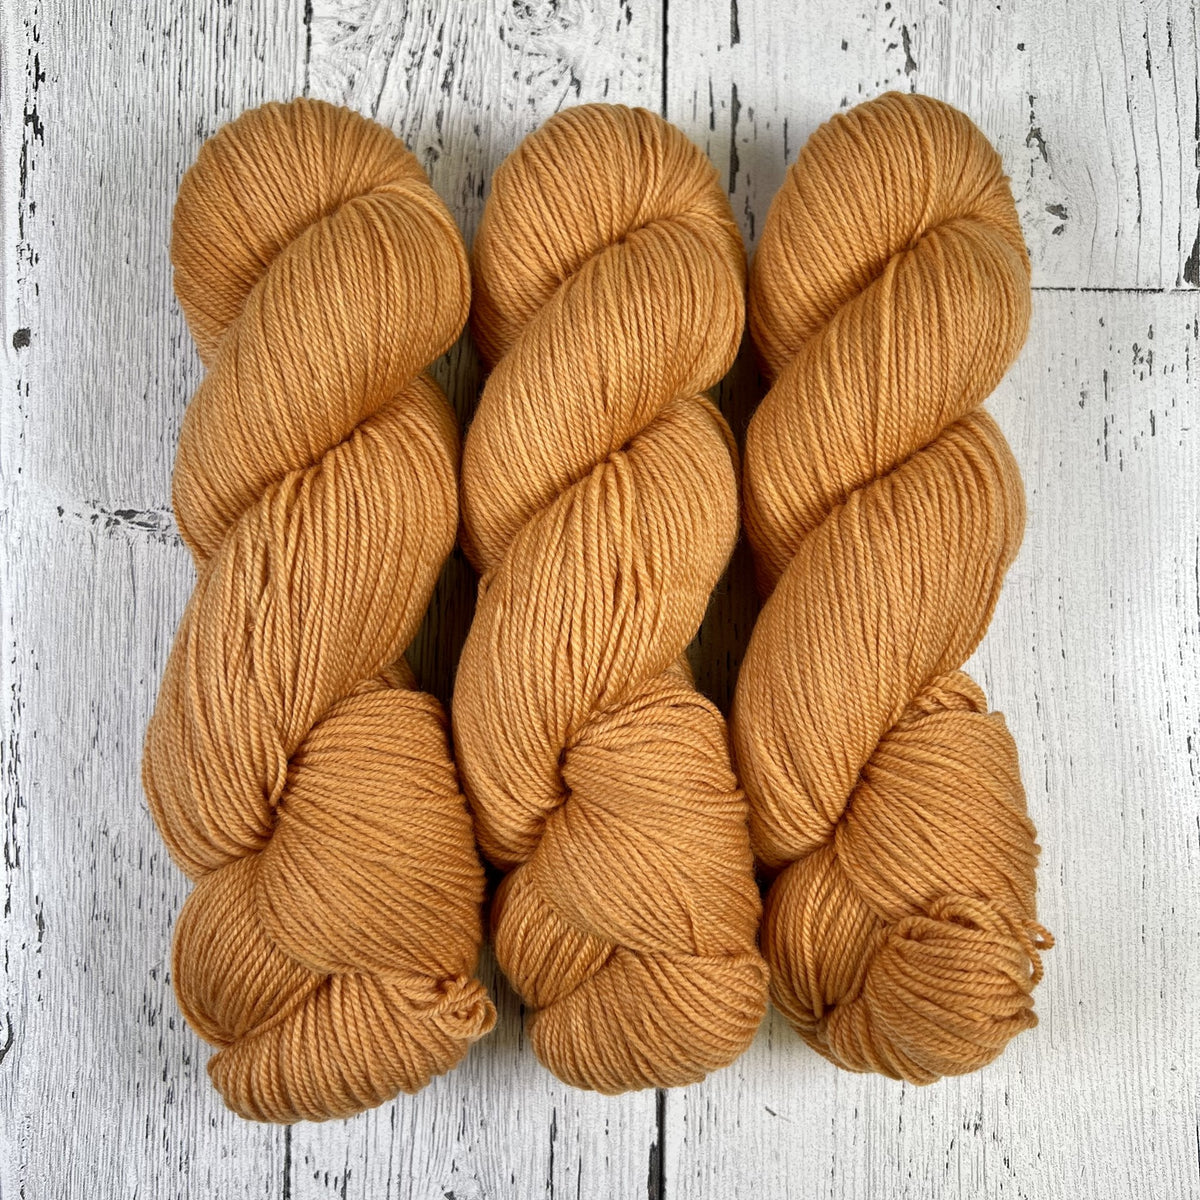 Apricot - Merino DK / Light Worsted - Dyed Stock